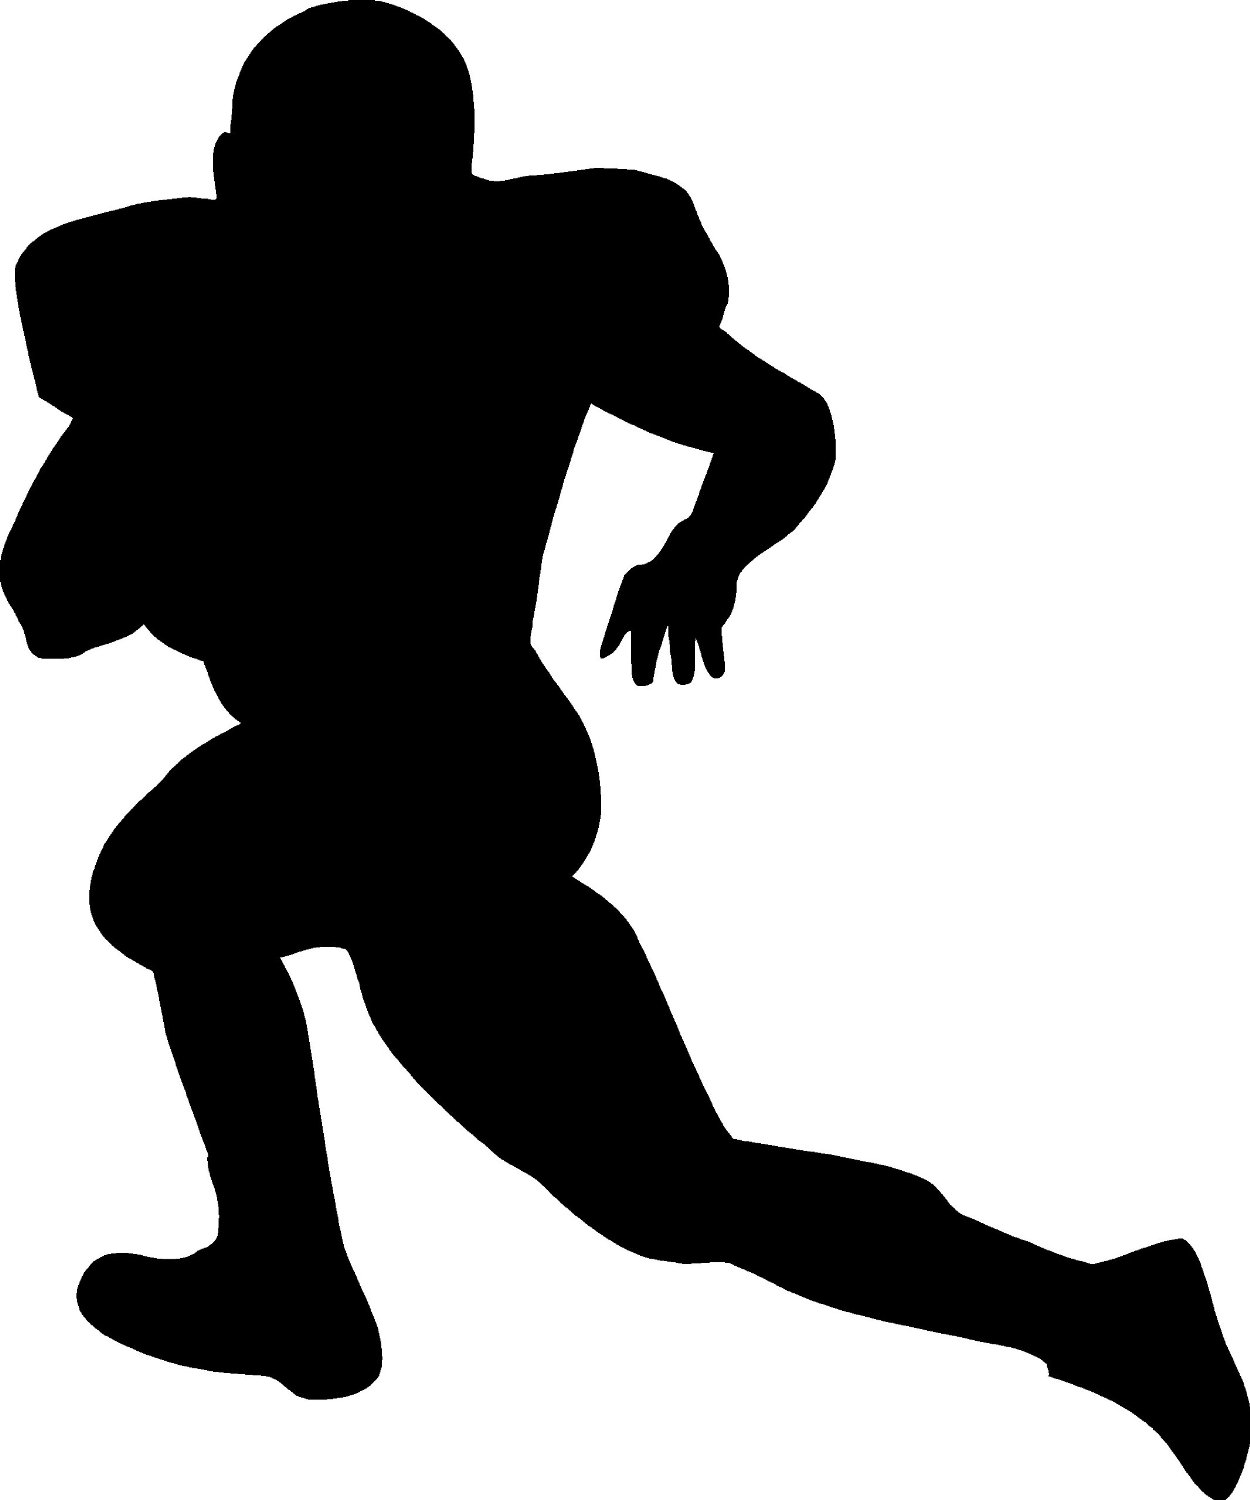 Football Player Silhouette Clipart - Free Clip Art Images